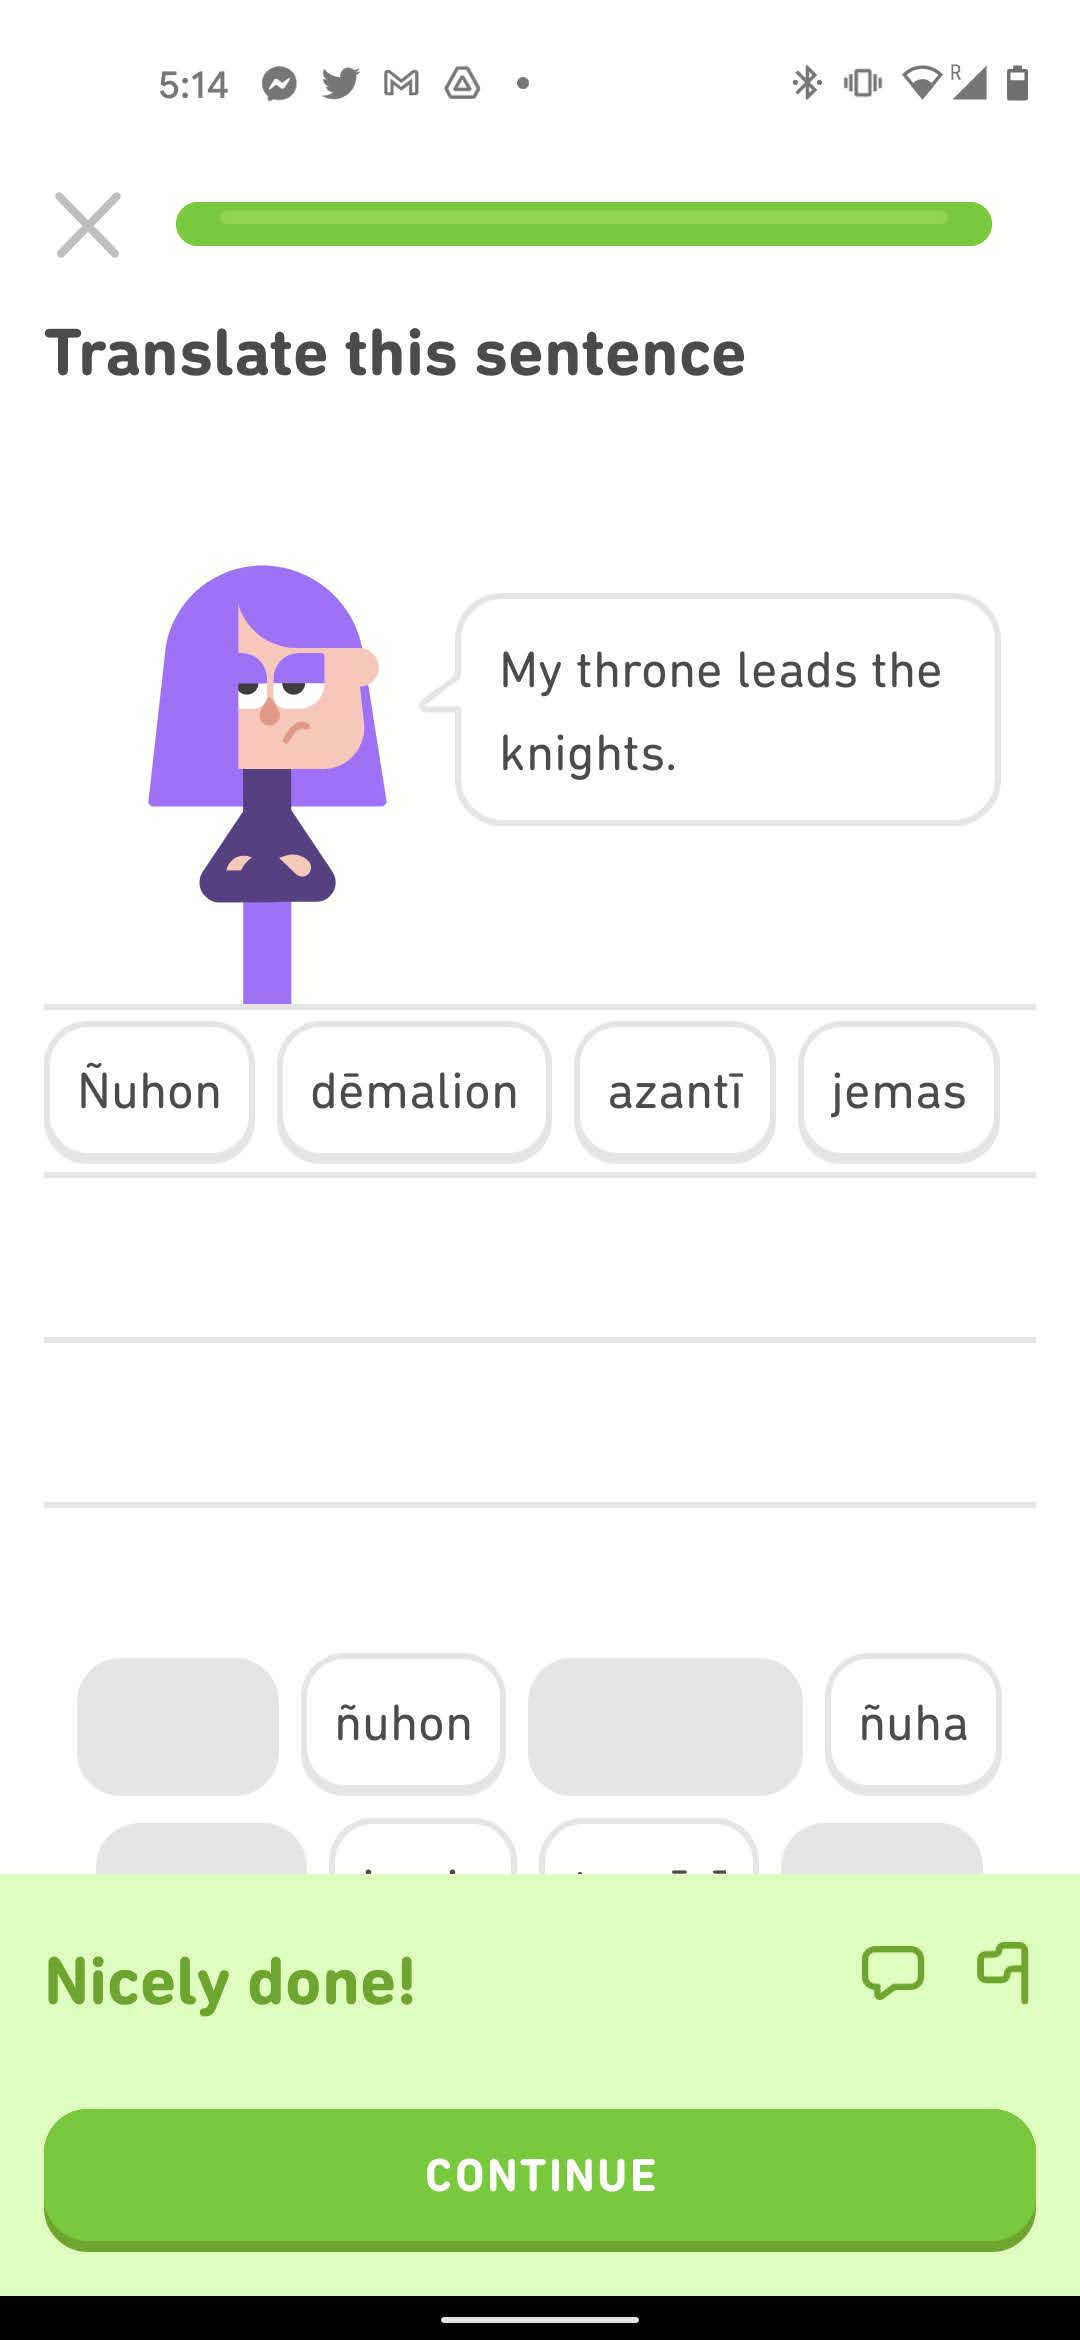 Screenshot of an exercise from Duolingo's High Valyrian course. The Duolingo character Lily says in English "My throne leads the knights." and the High Valyrian translation is spelled out below in word tiles.